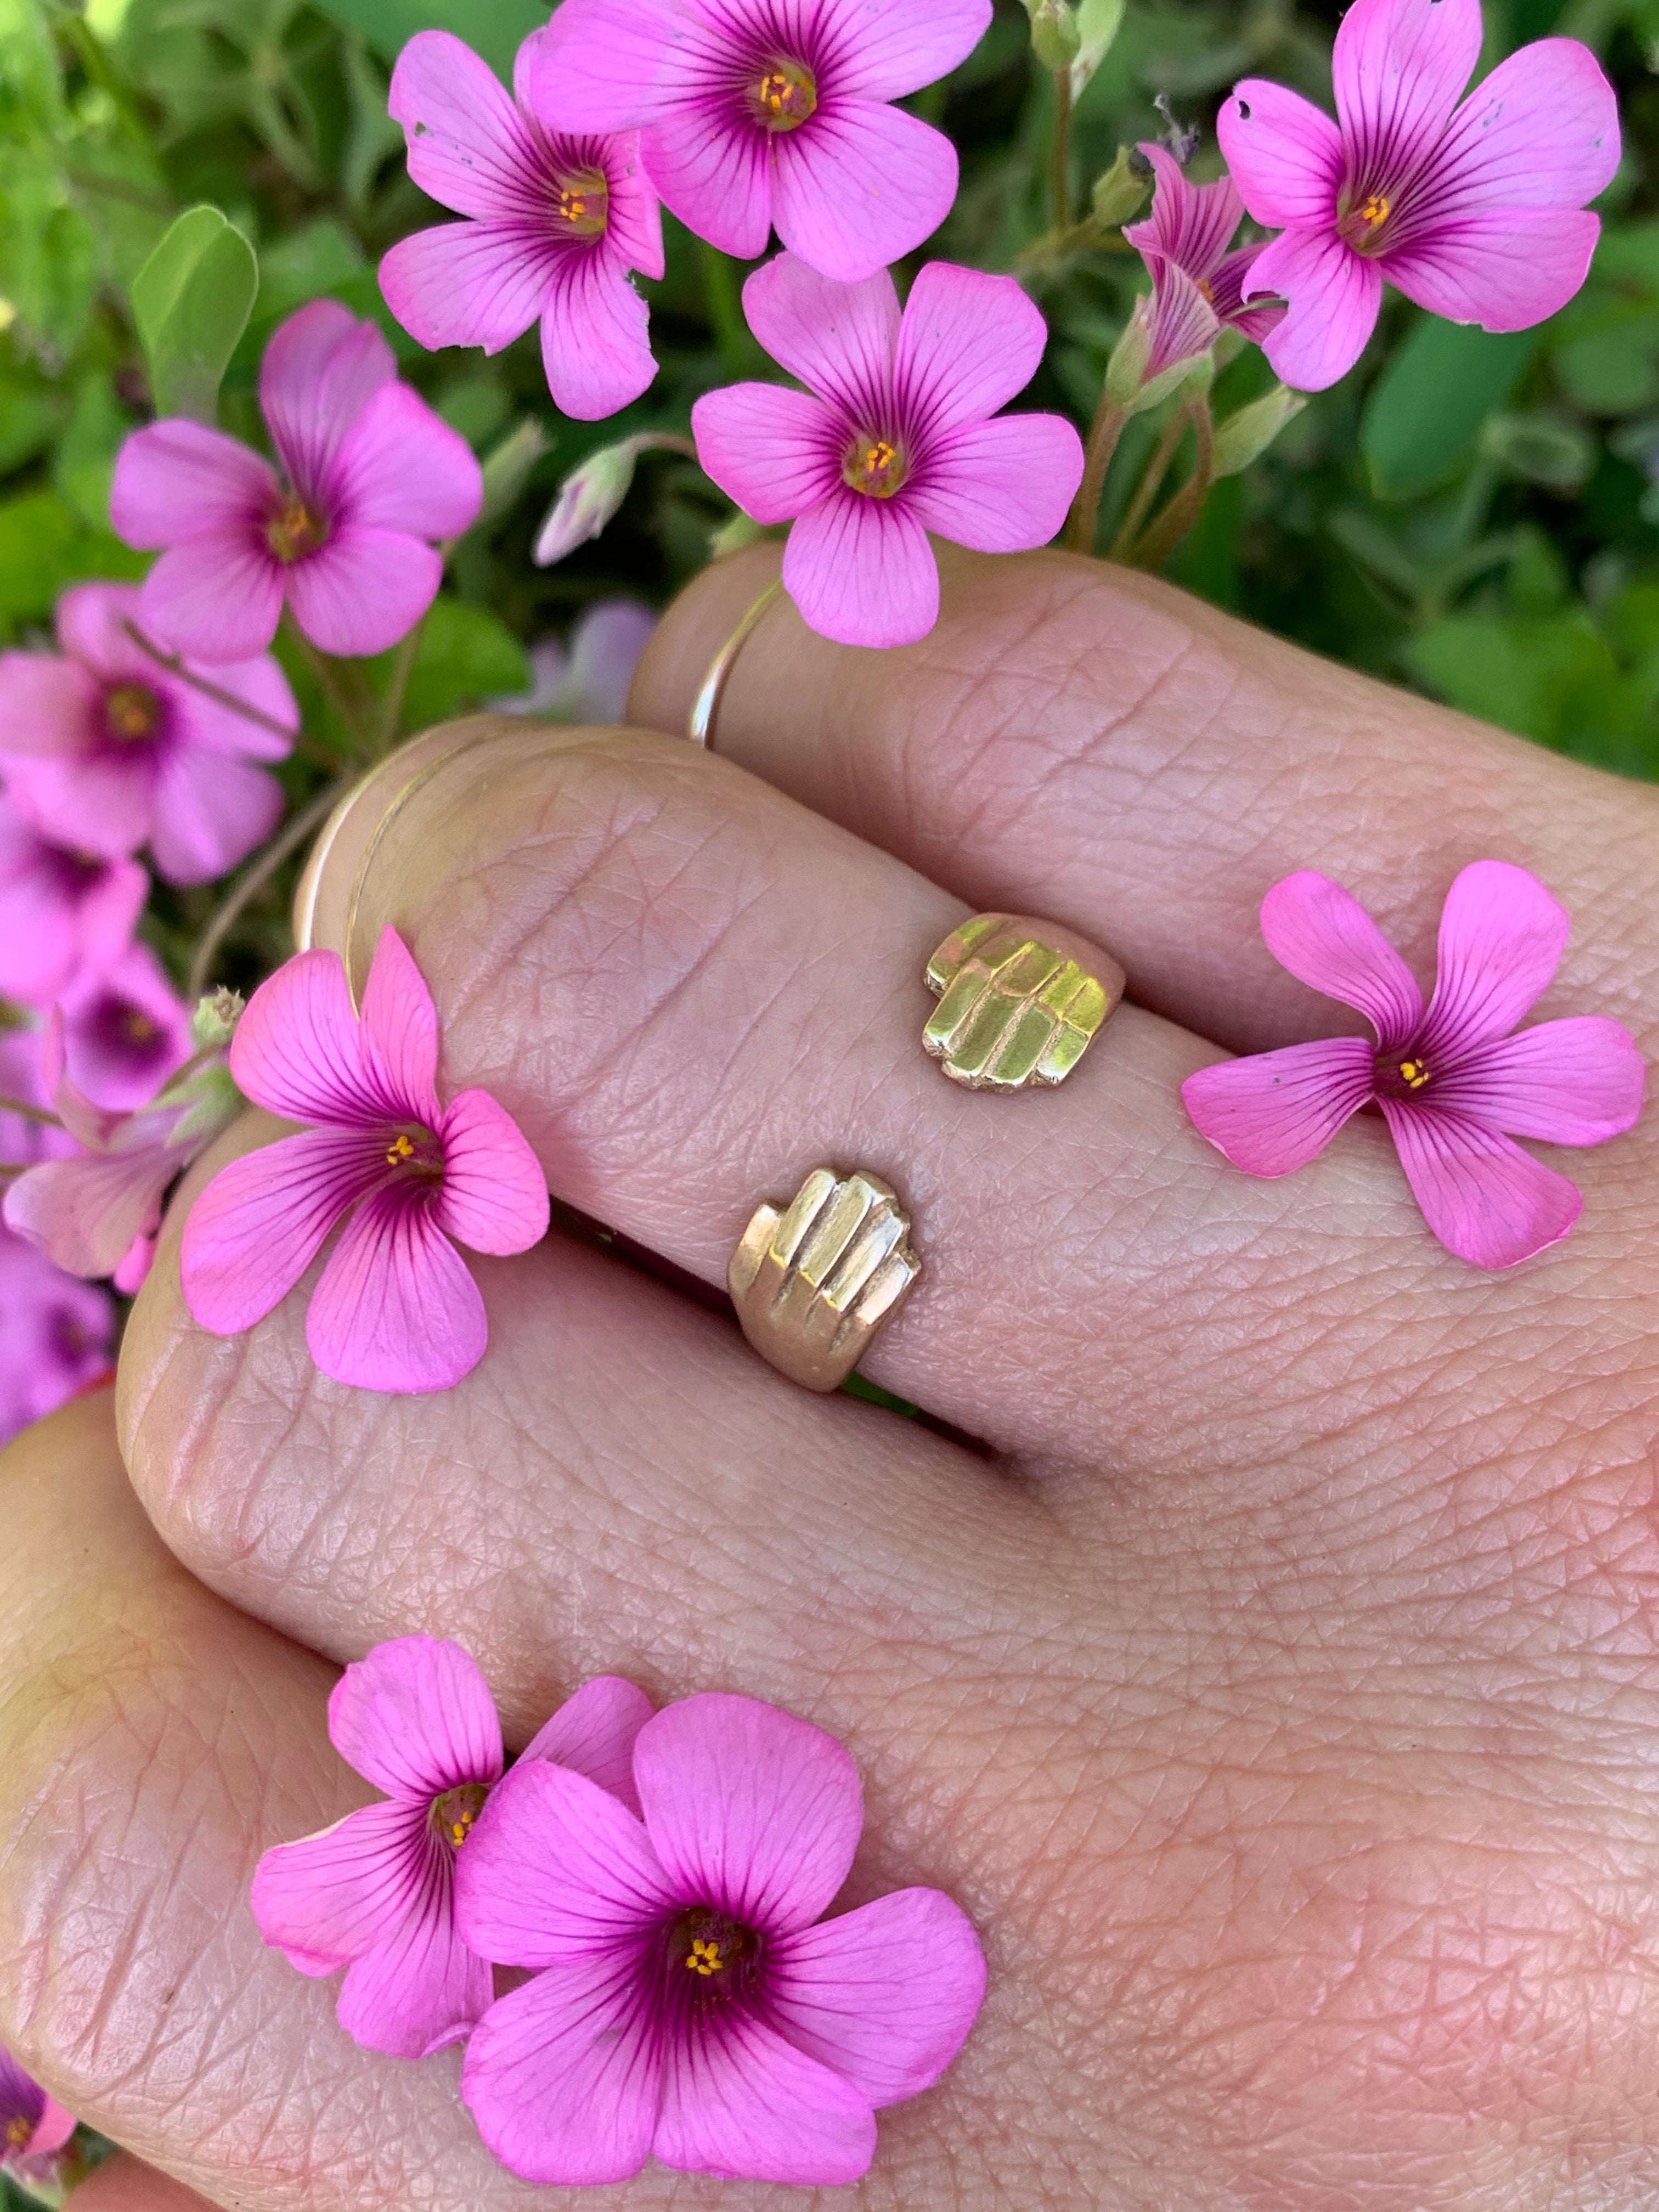 A Woman Wears The MIMOSA Handcrafted Hug Ring Jewelry